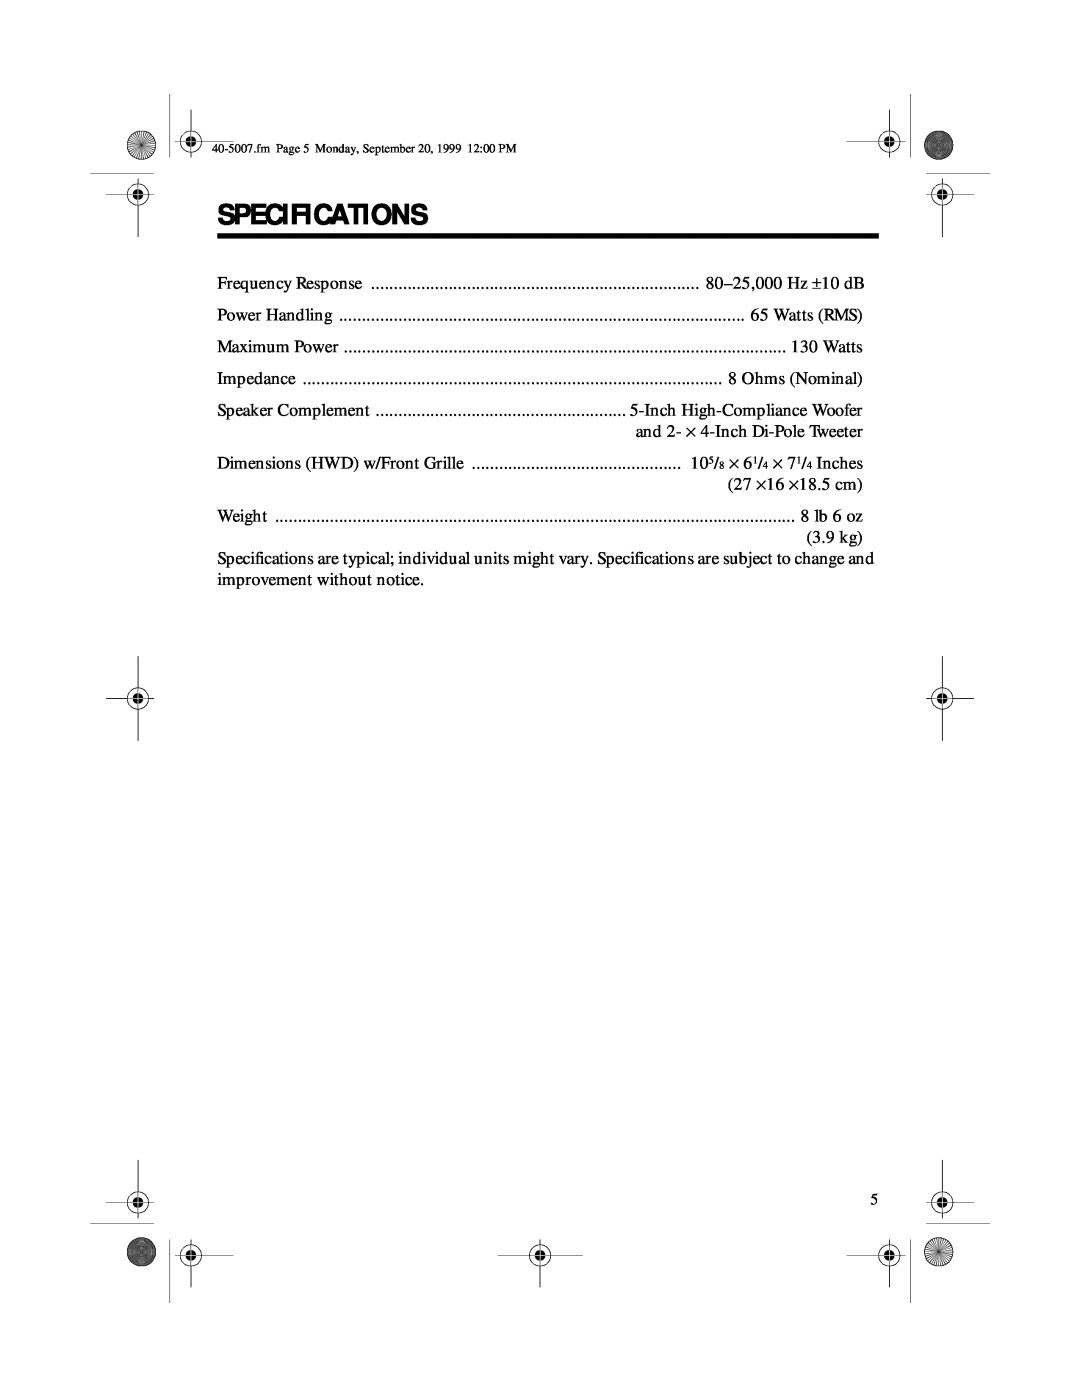 RCA PRO LX5 II manual Specifications 